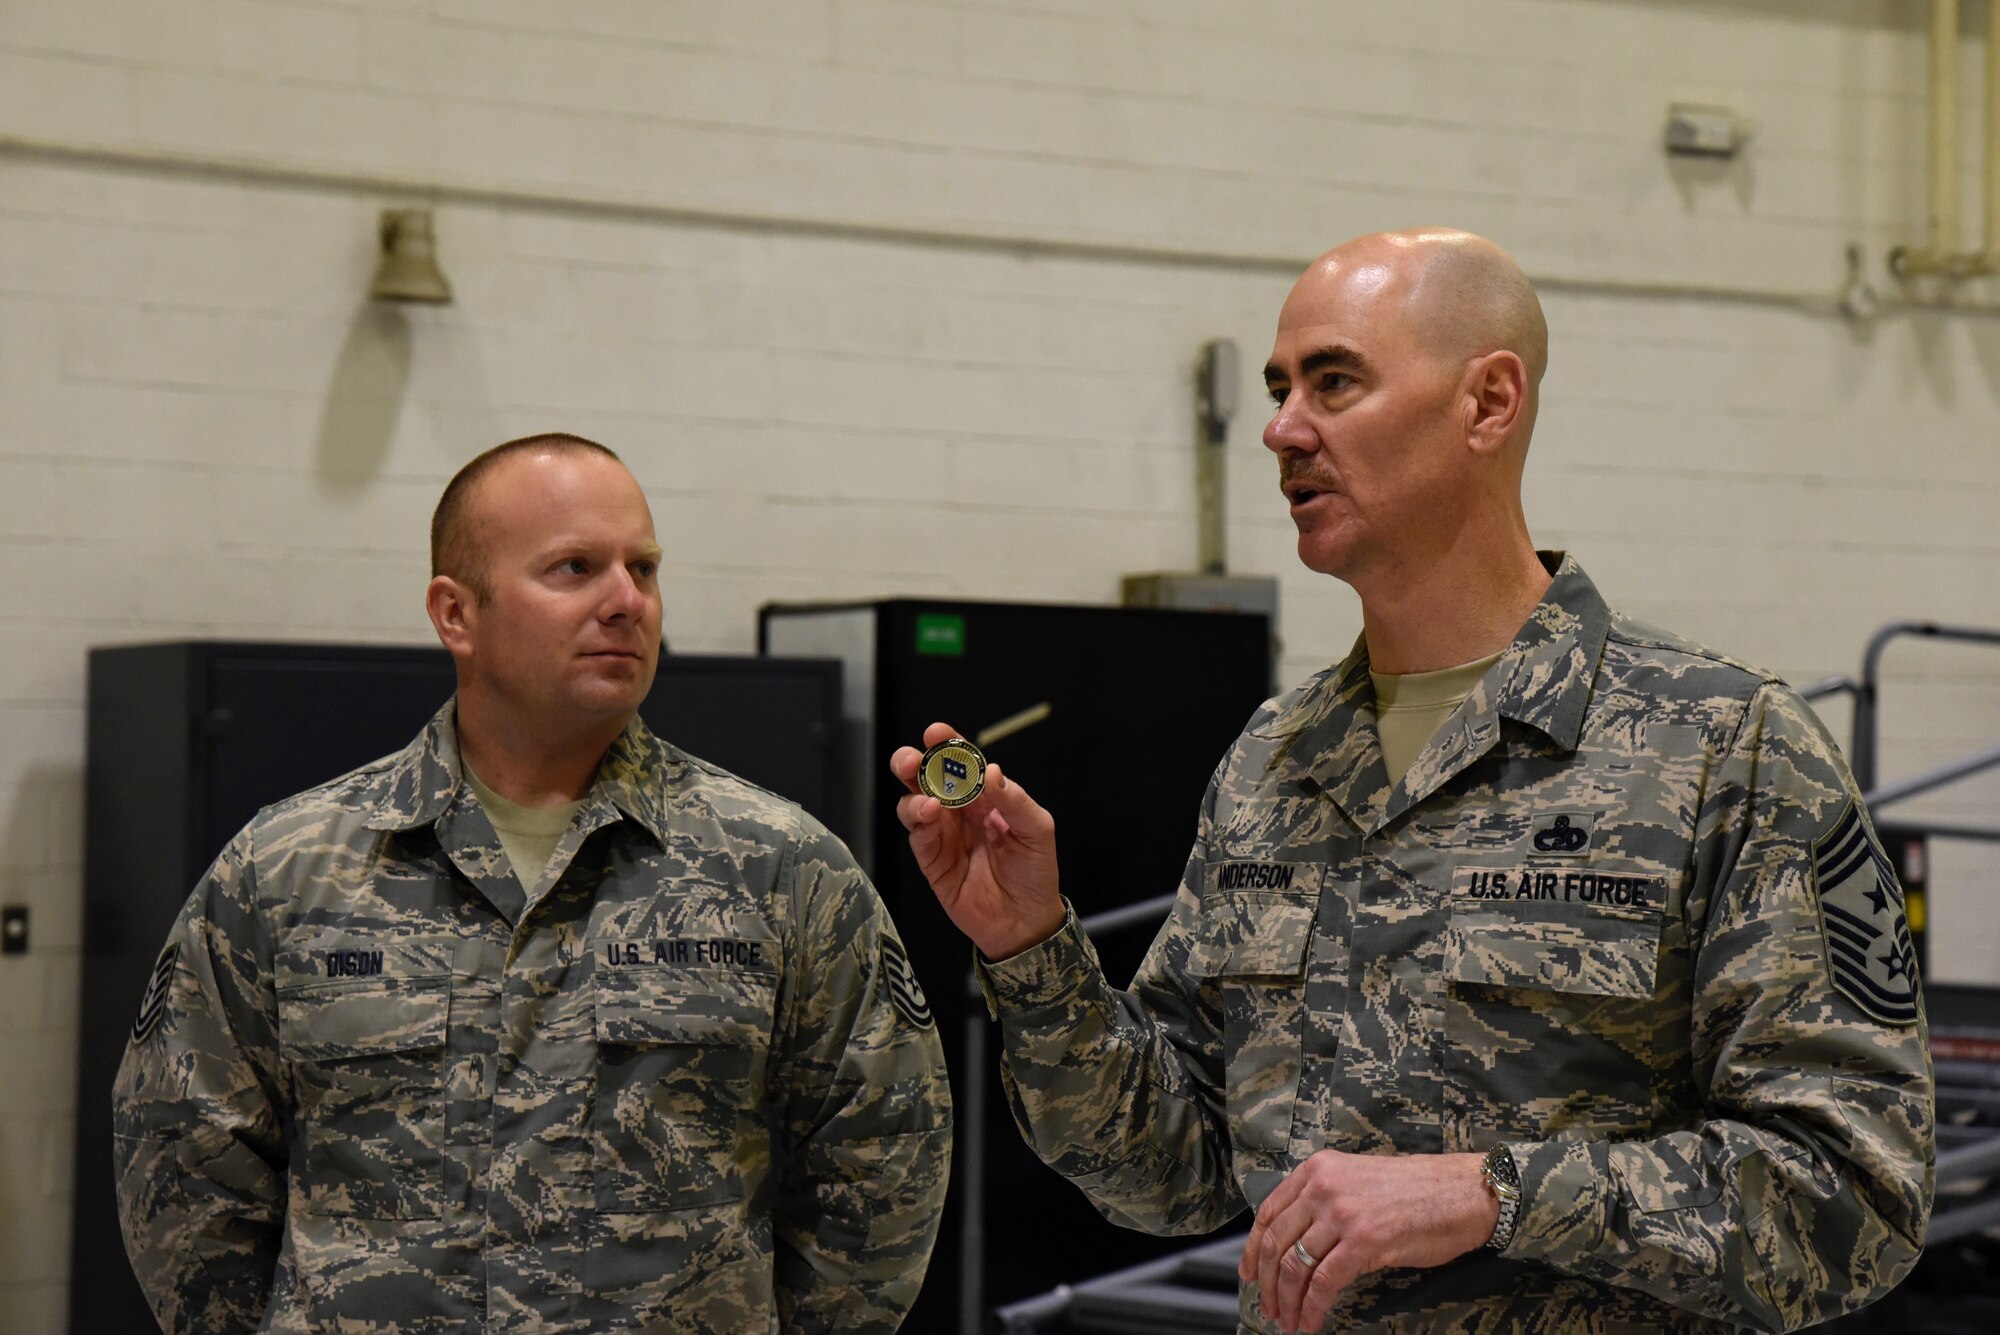 Command Chief Master Sgt. Ronald C. Anderson Jr., Command Chief Master Sergeant of the Air National Guard, gives a speech before presenting a coin to Tech. Sgt. Michael Dison, 175th Aircraft Maintenance Squadron crew chief, February 10, 2018 while touring Warfield Air National Guard Base, Middle River, Md.